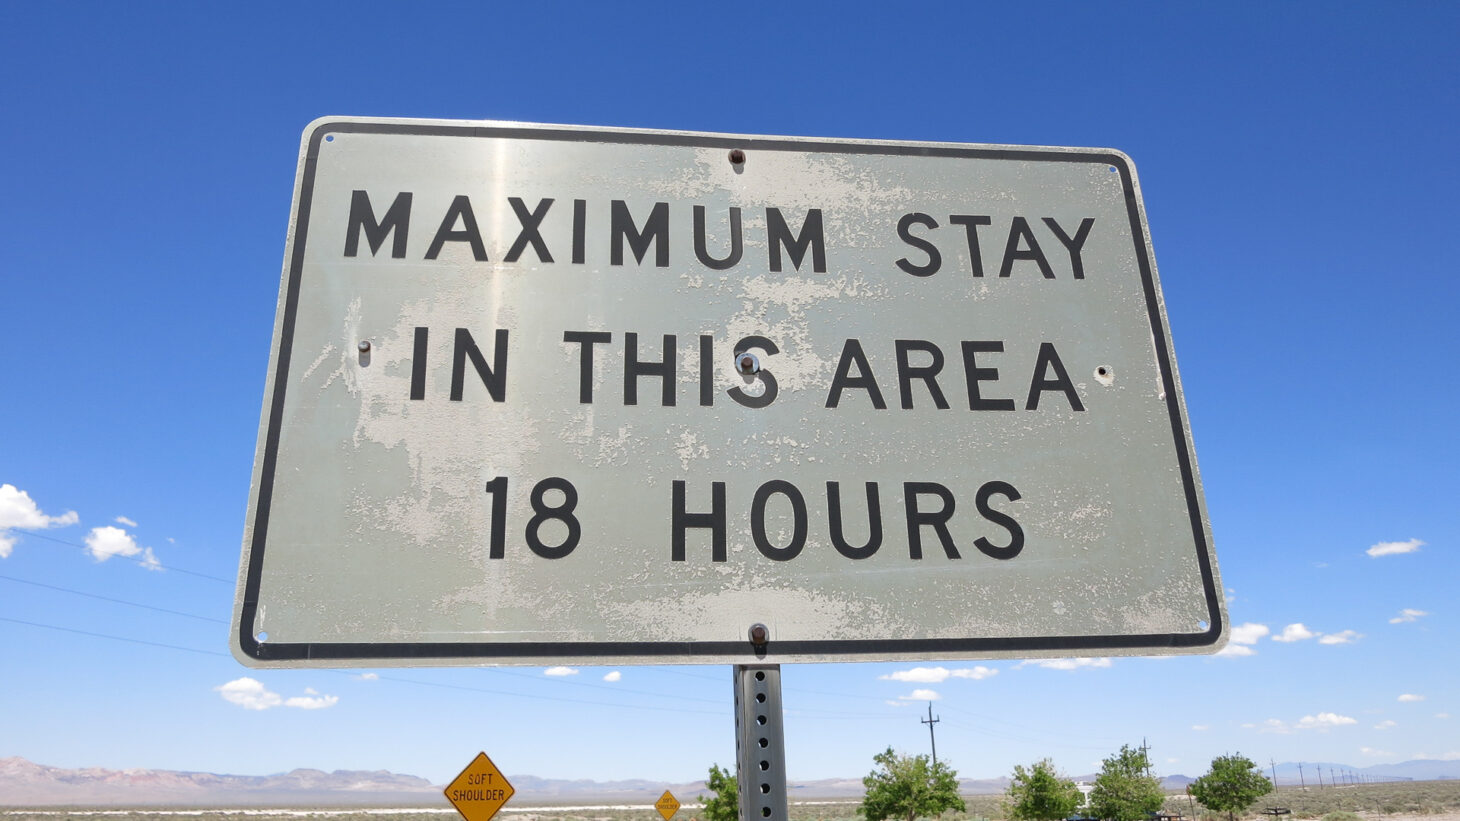 Sign at rest stop reading "Maximum stay in this area 18 hours"